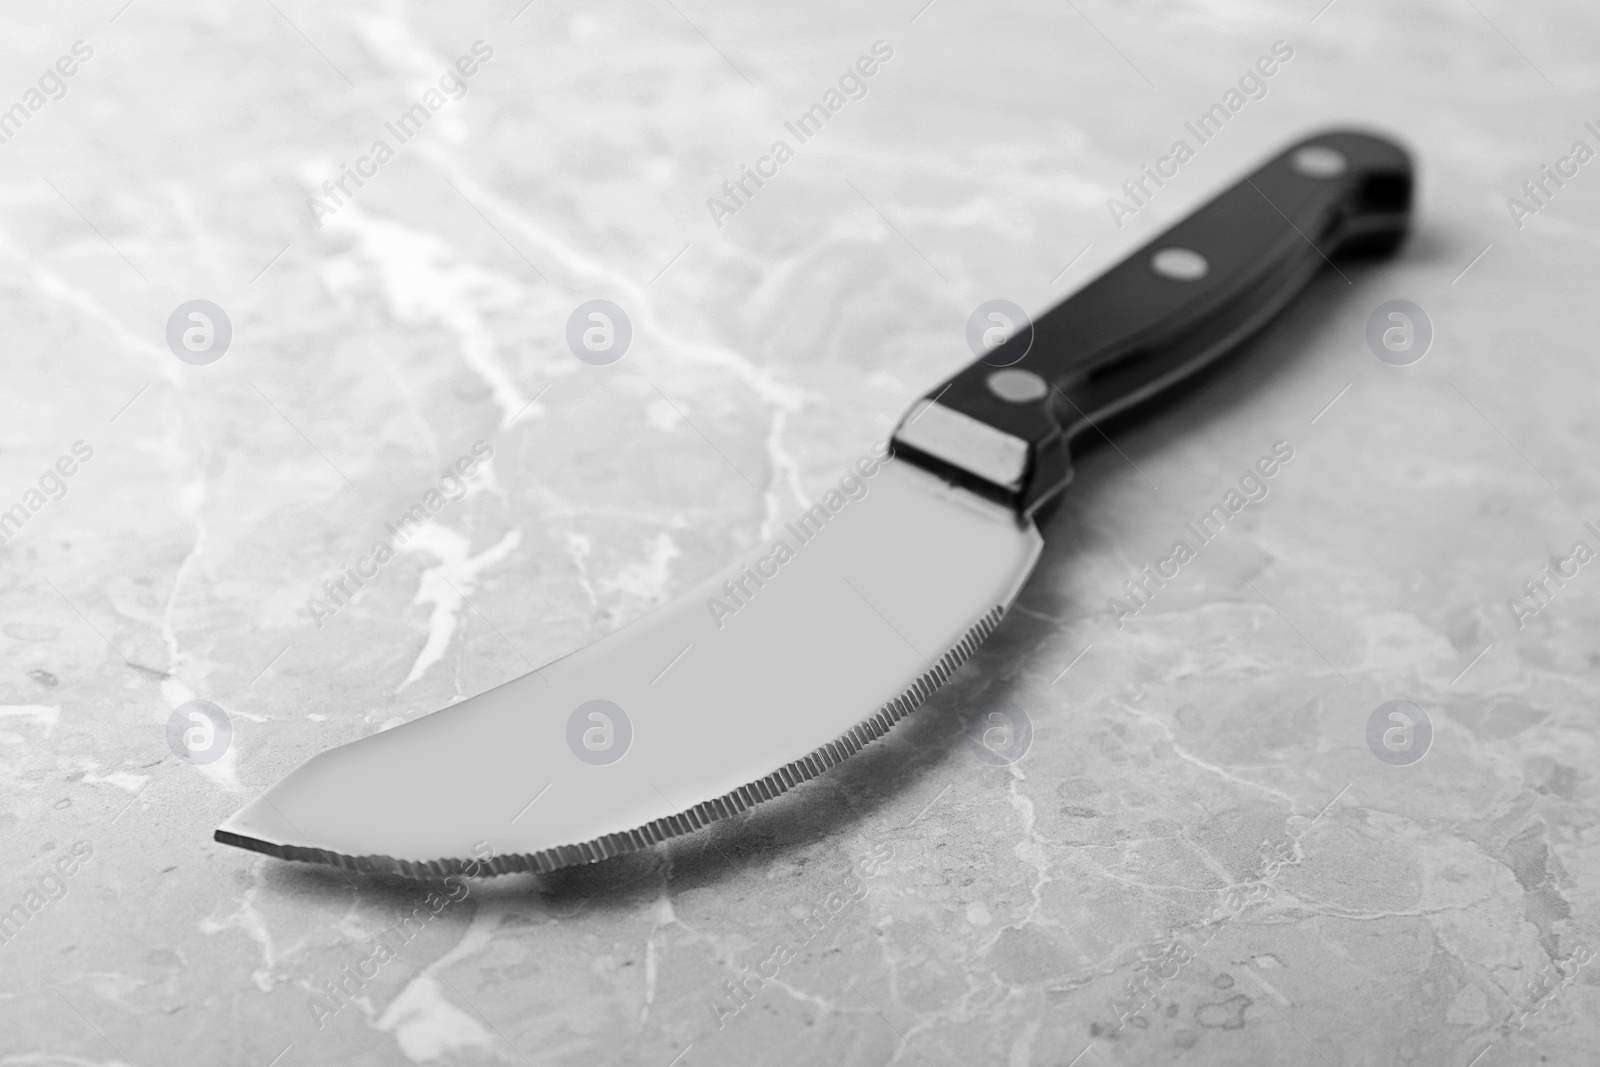 Photo of Sharp pizza knife with plastic handle on grey background